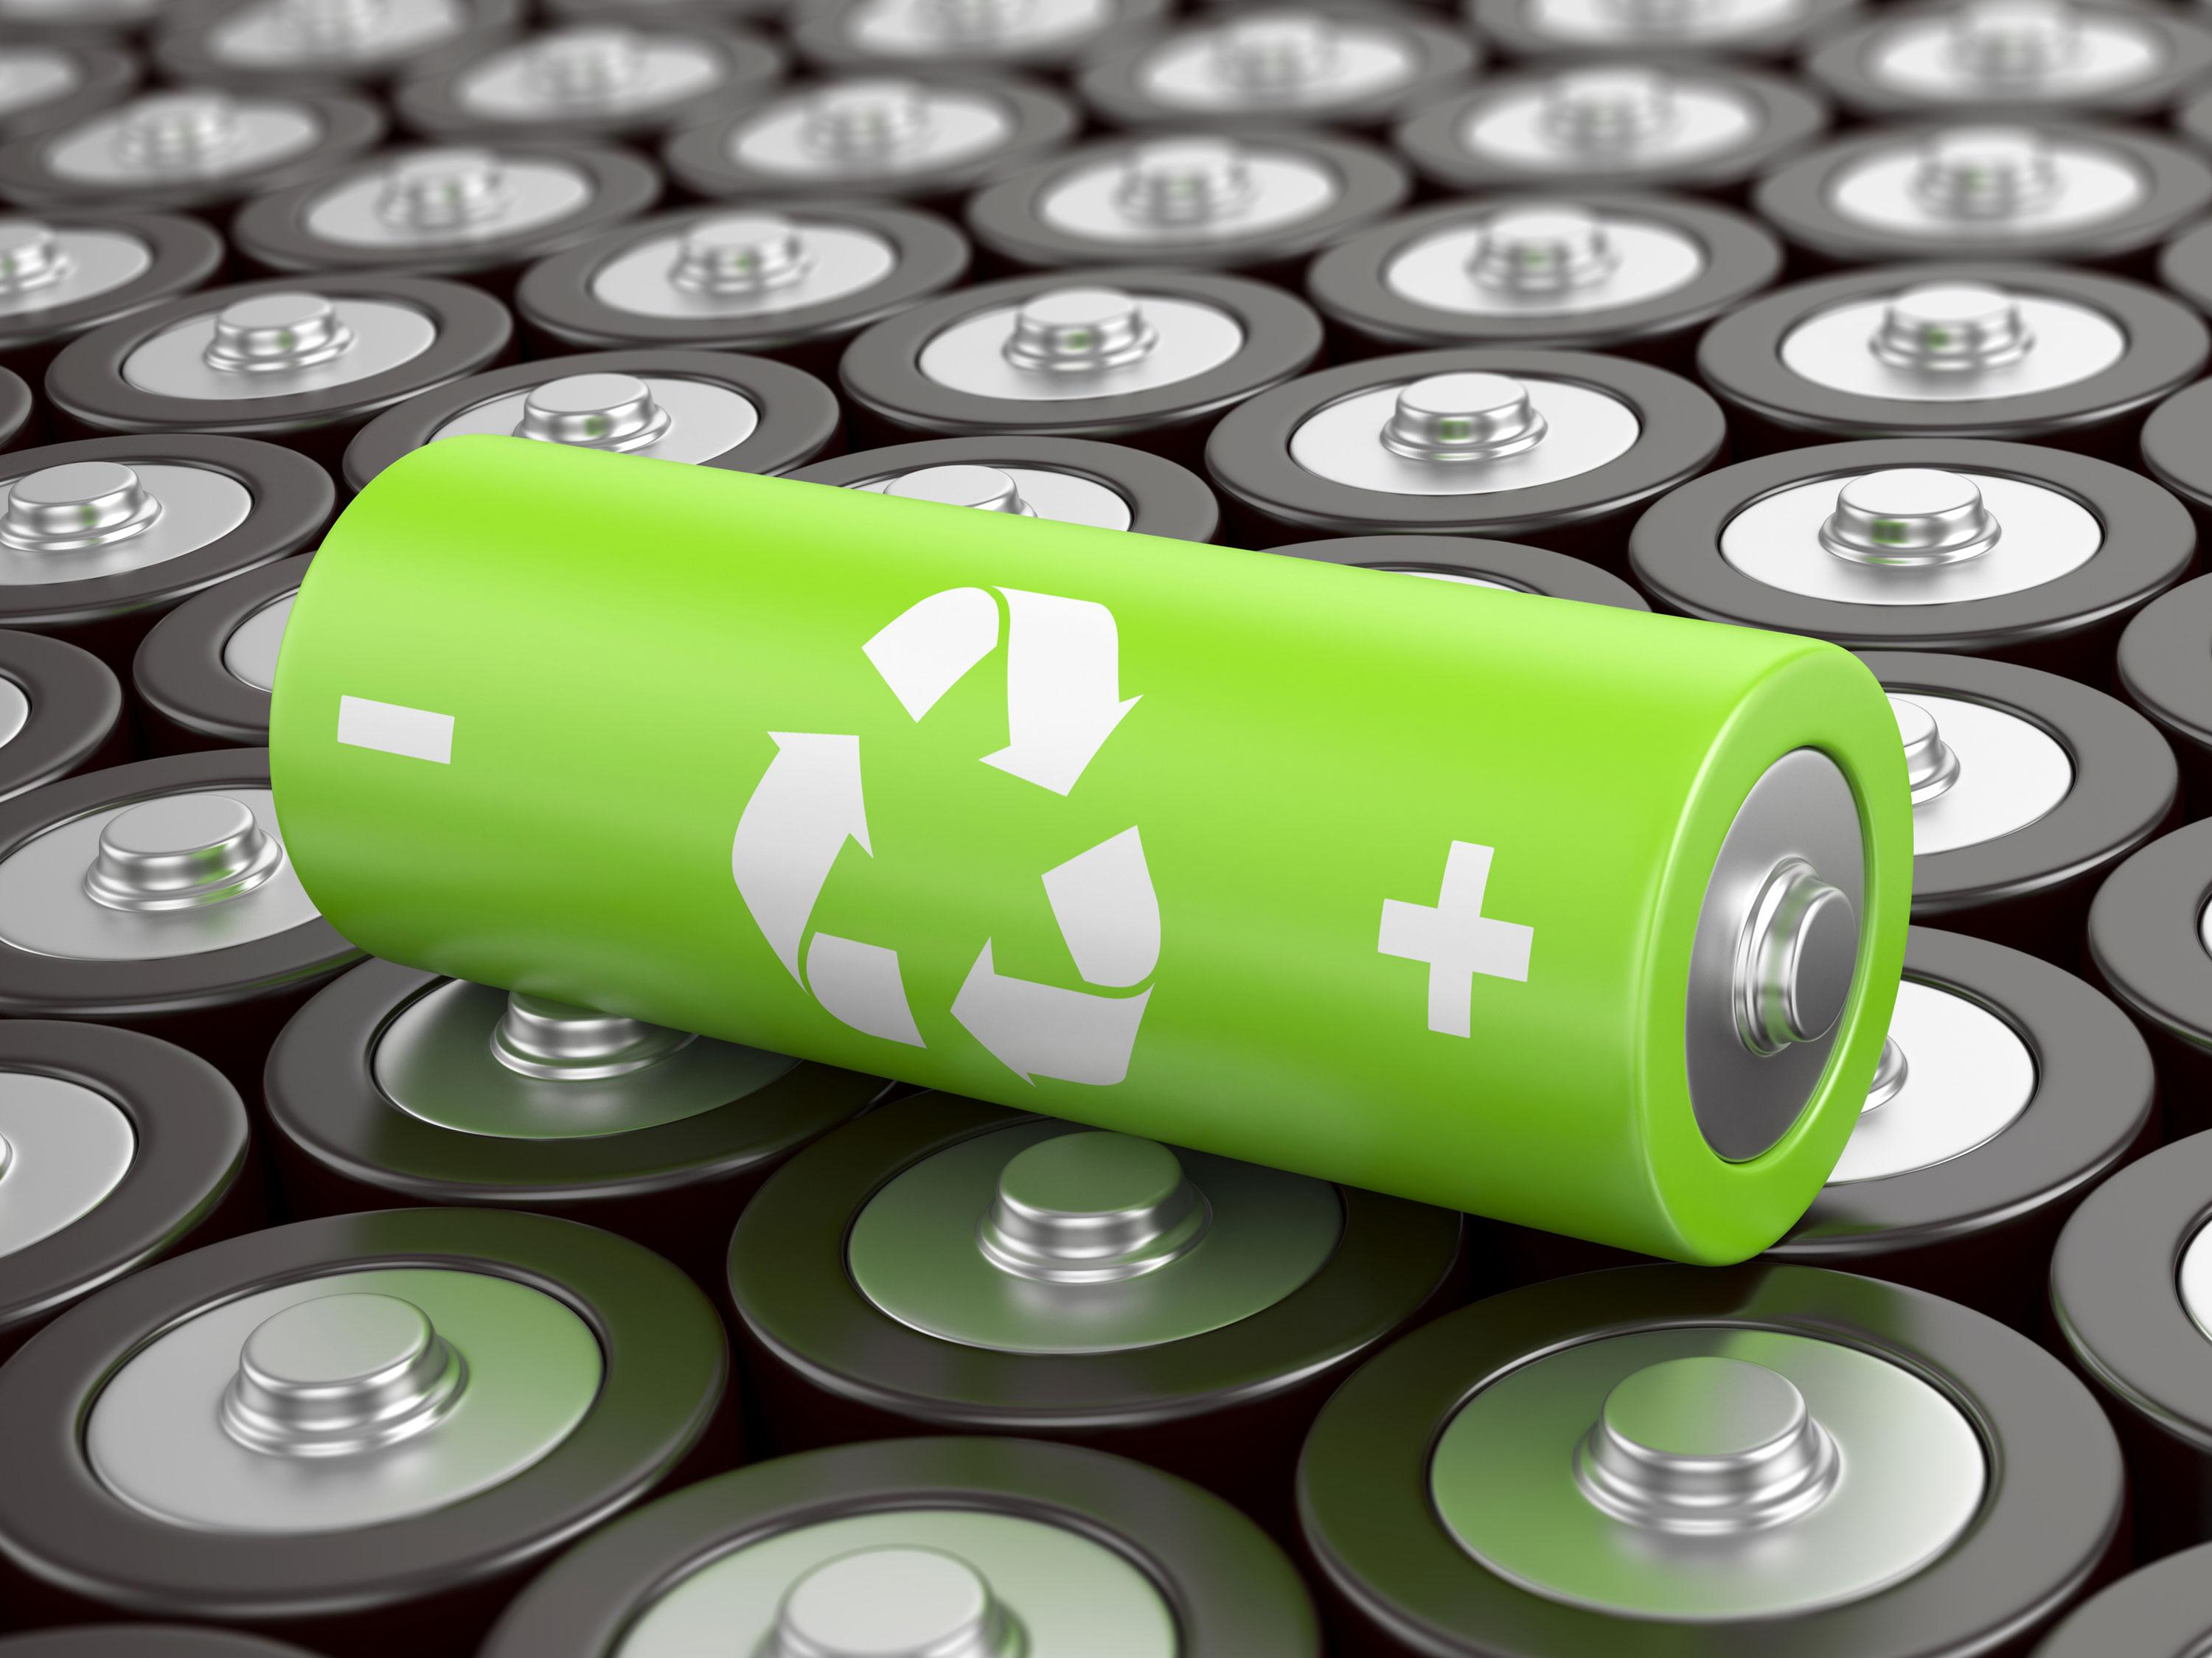 lithium rechargeable batteries